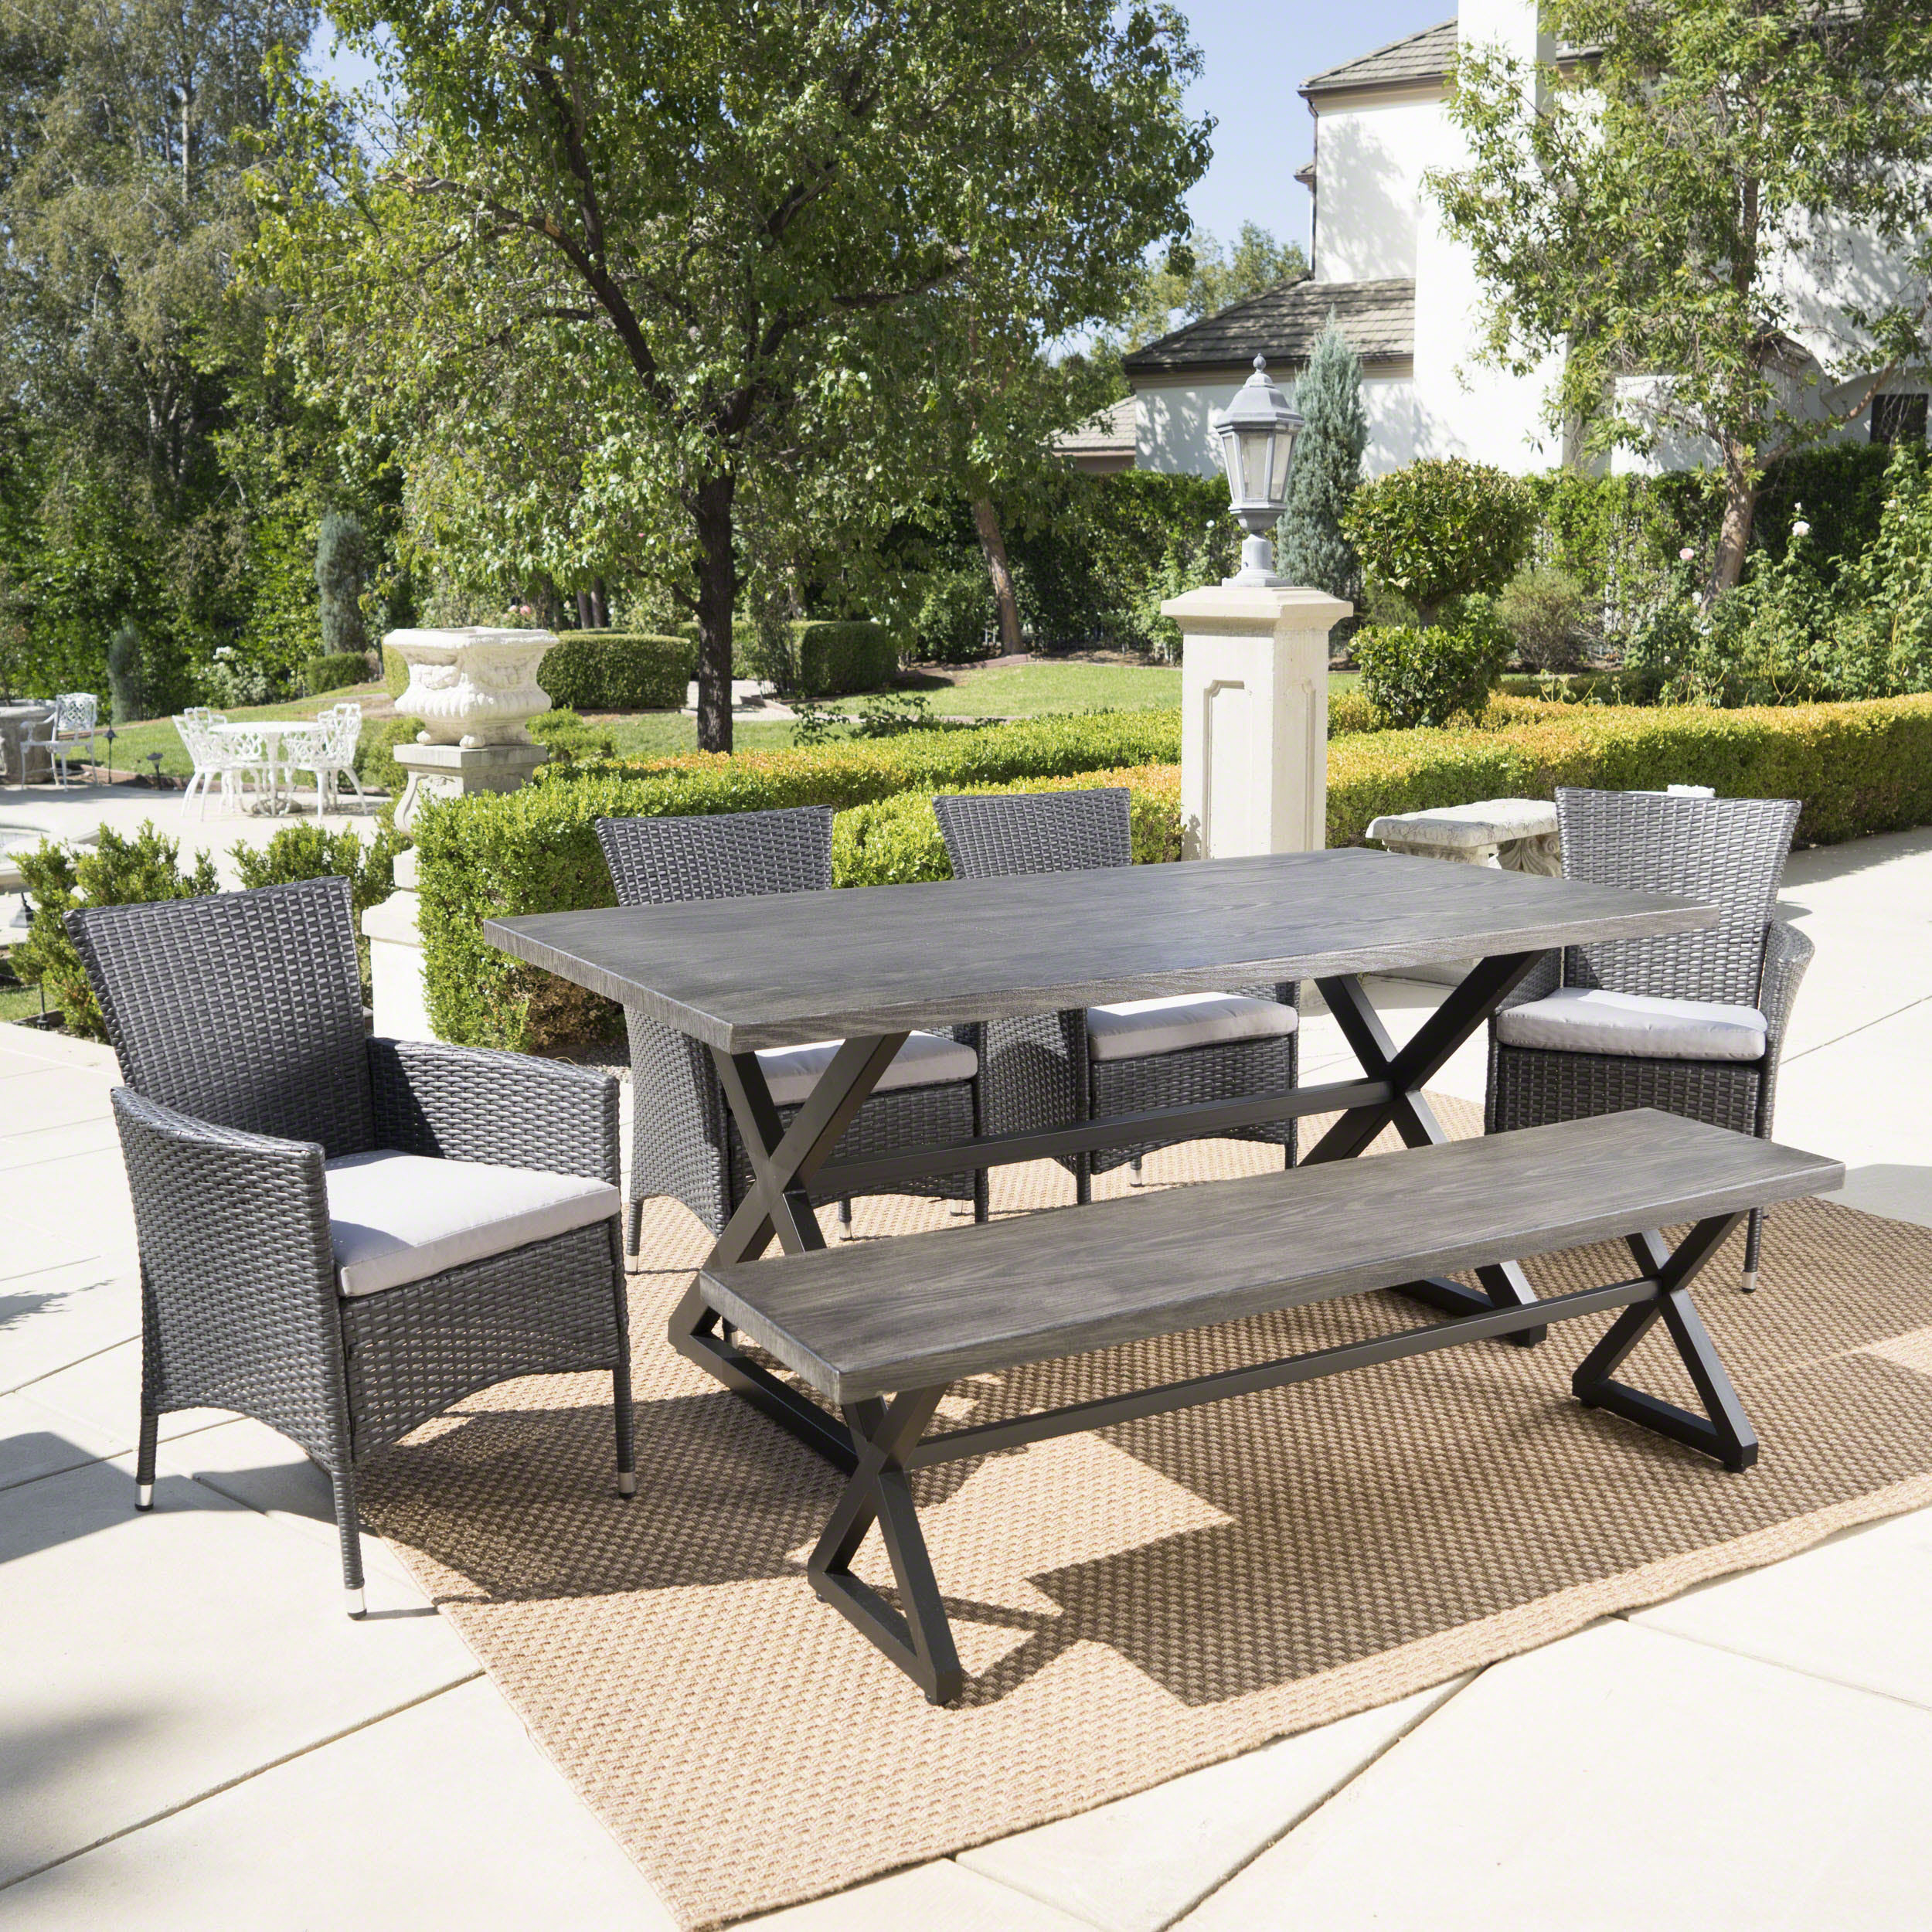 Owenburg Outdoor 6 Piece Aluminum Dining Set With Bench And Wicker Dining Chairs - Brown/Multi-brown